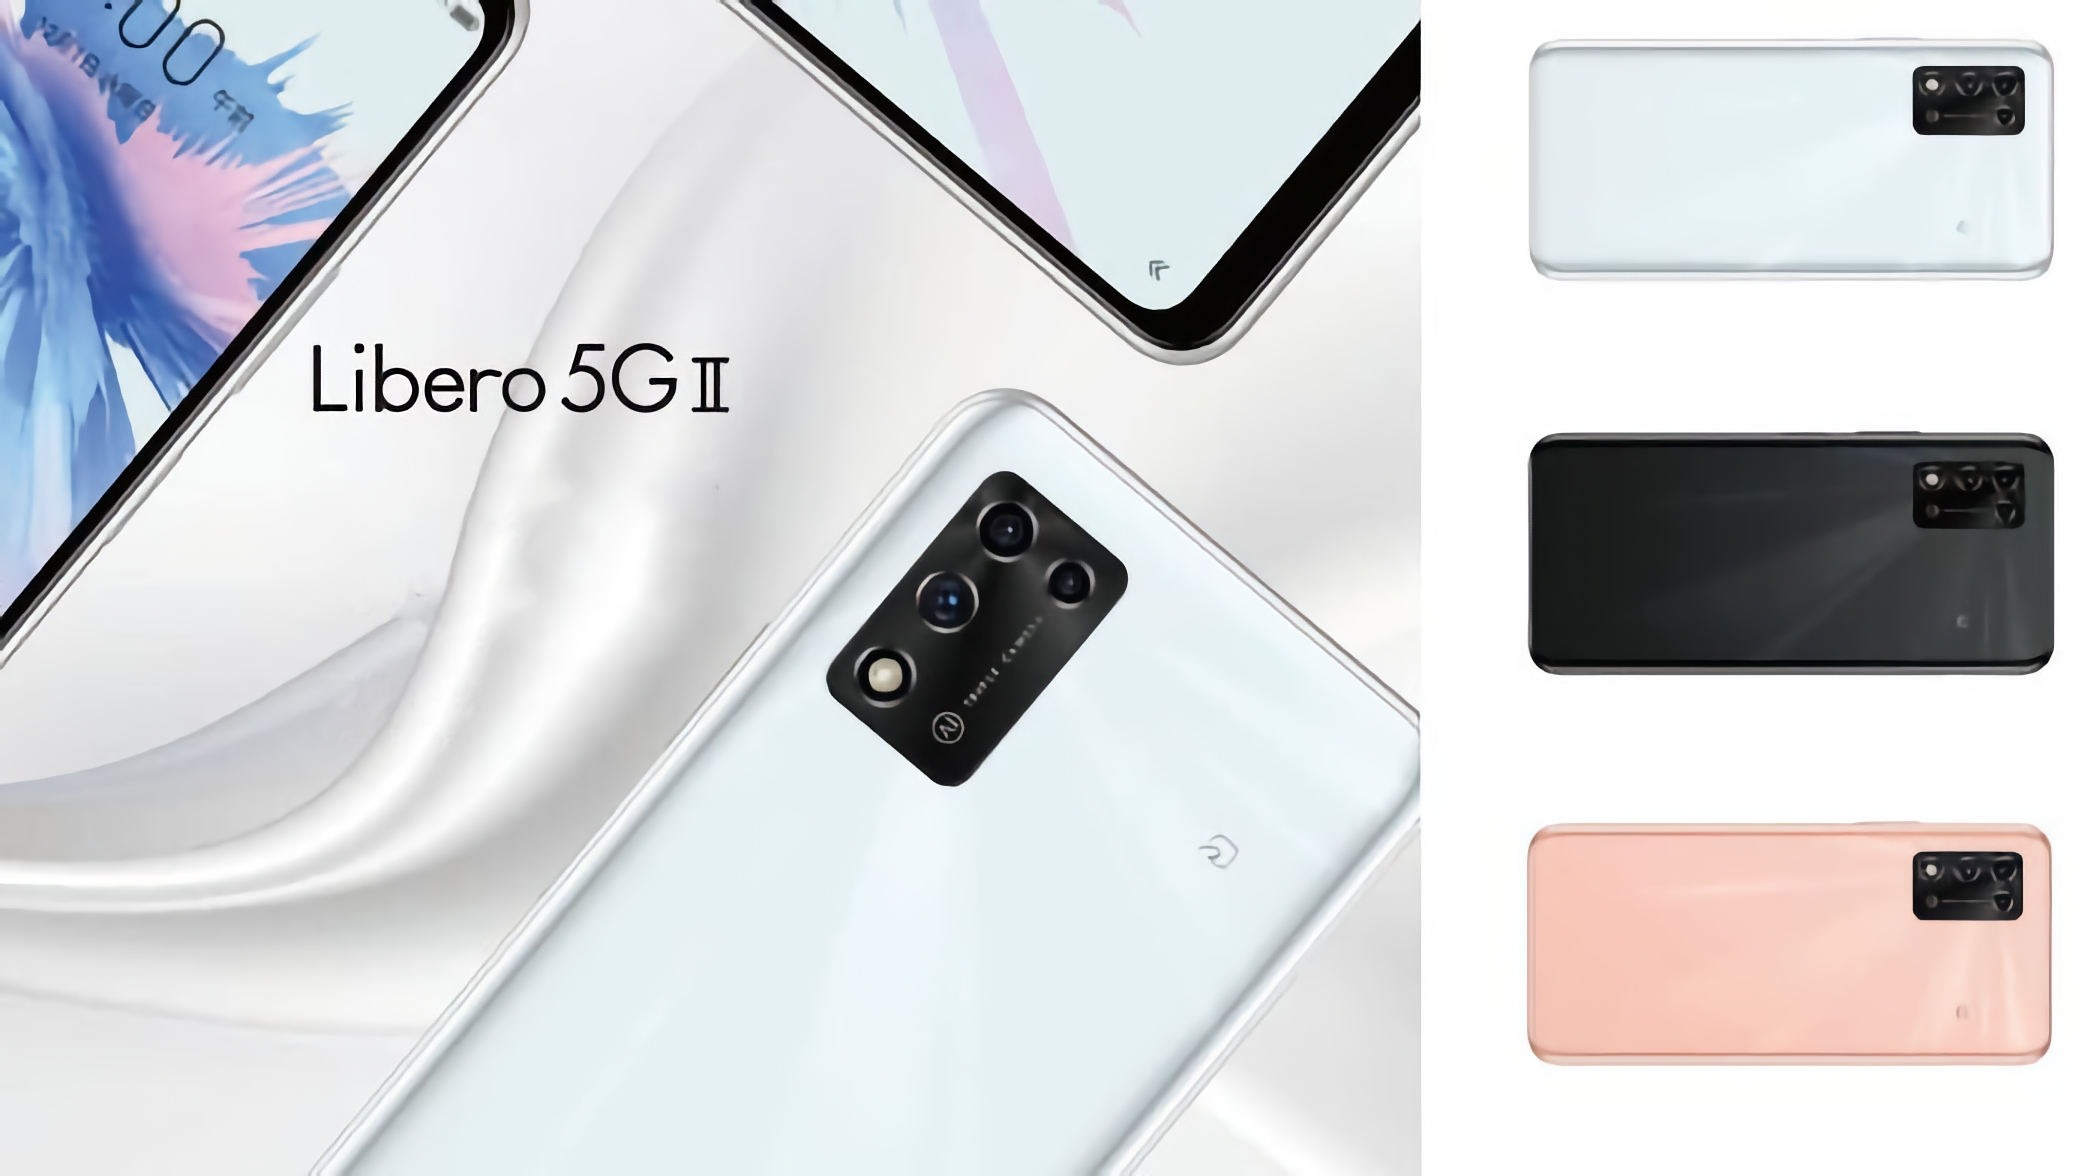 ZTE Libero 5G II: budget smartphone with MediaTek Dimensity 700 chip, IPX7 protection and eSIM support